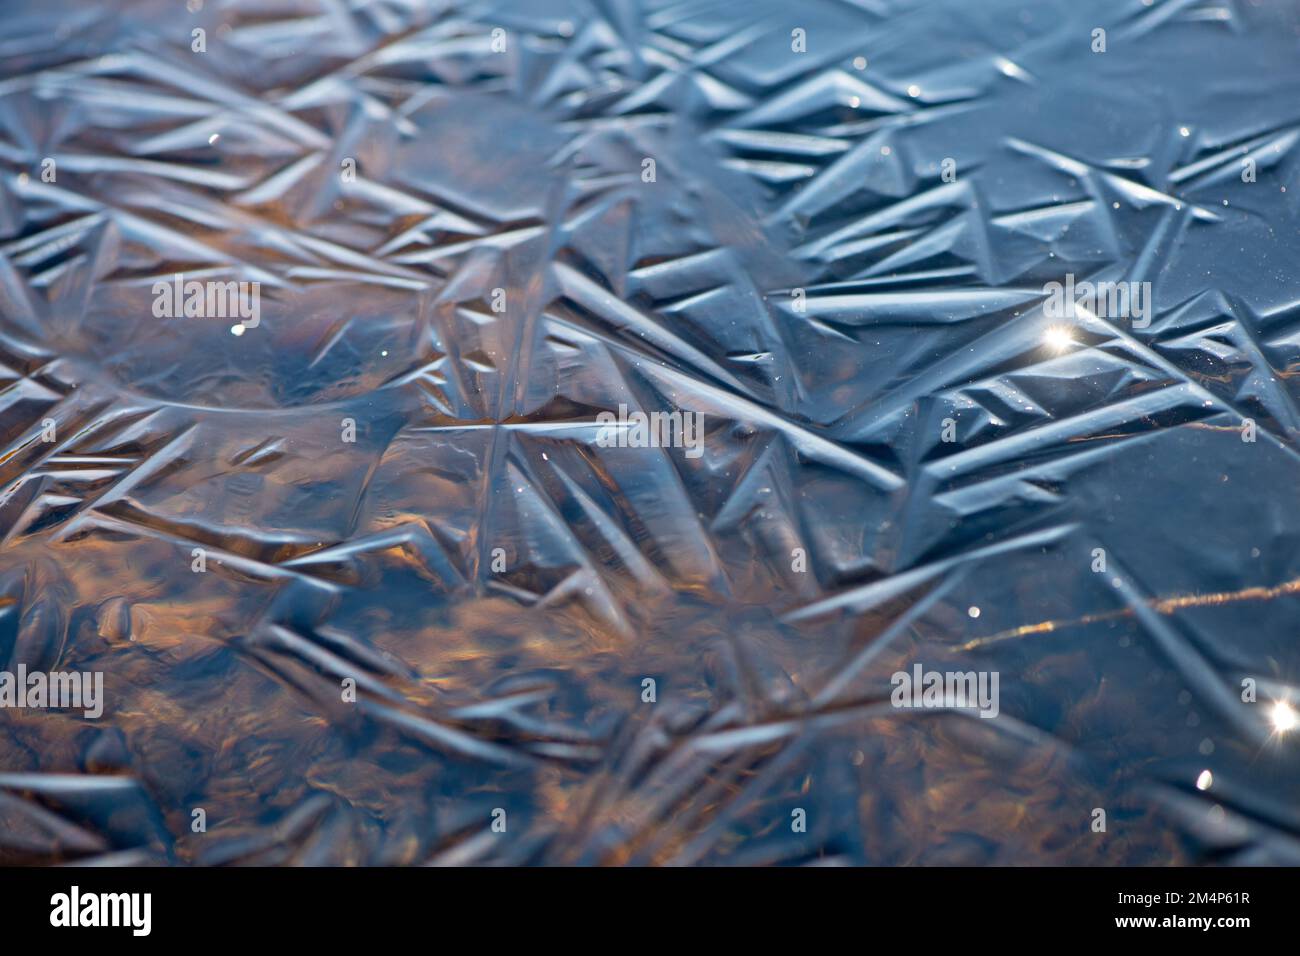 Ice patterns form on a New Forest Stream shown by catching the winter light. The stream sits within the wetlands of the national park. Stock Photo